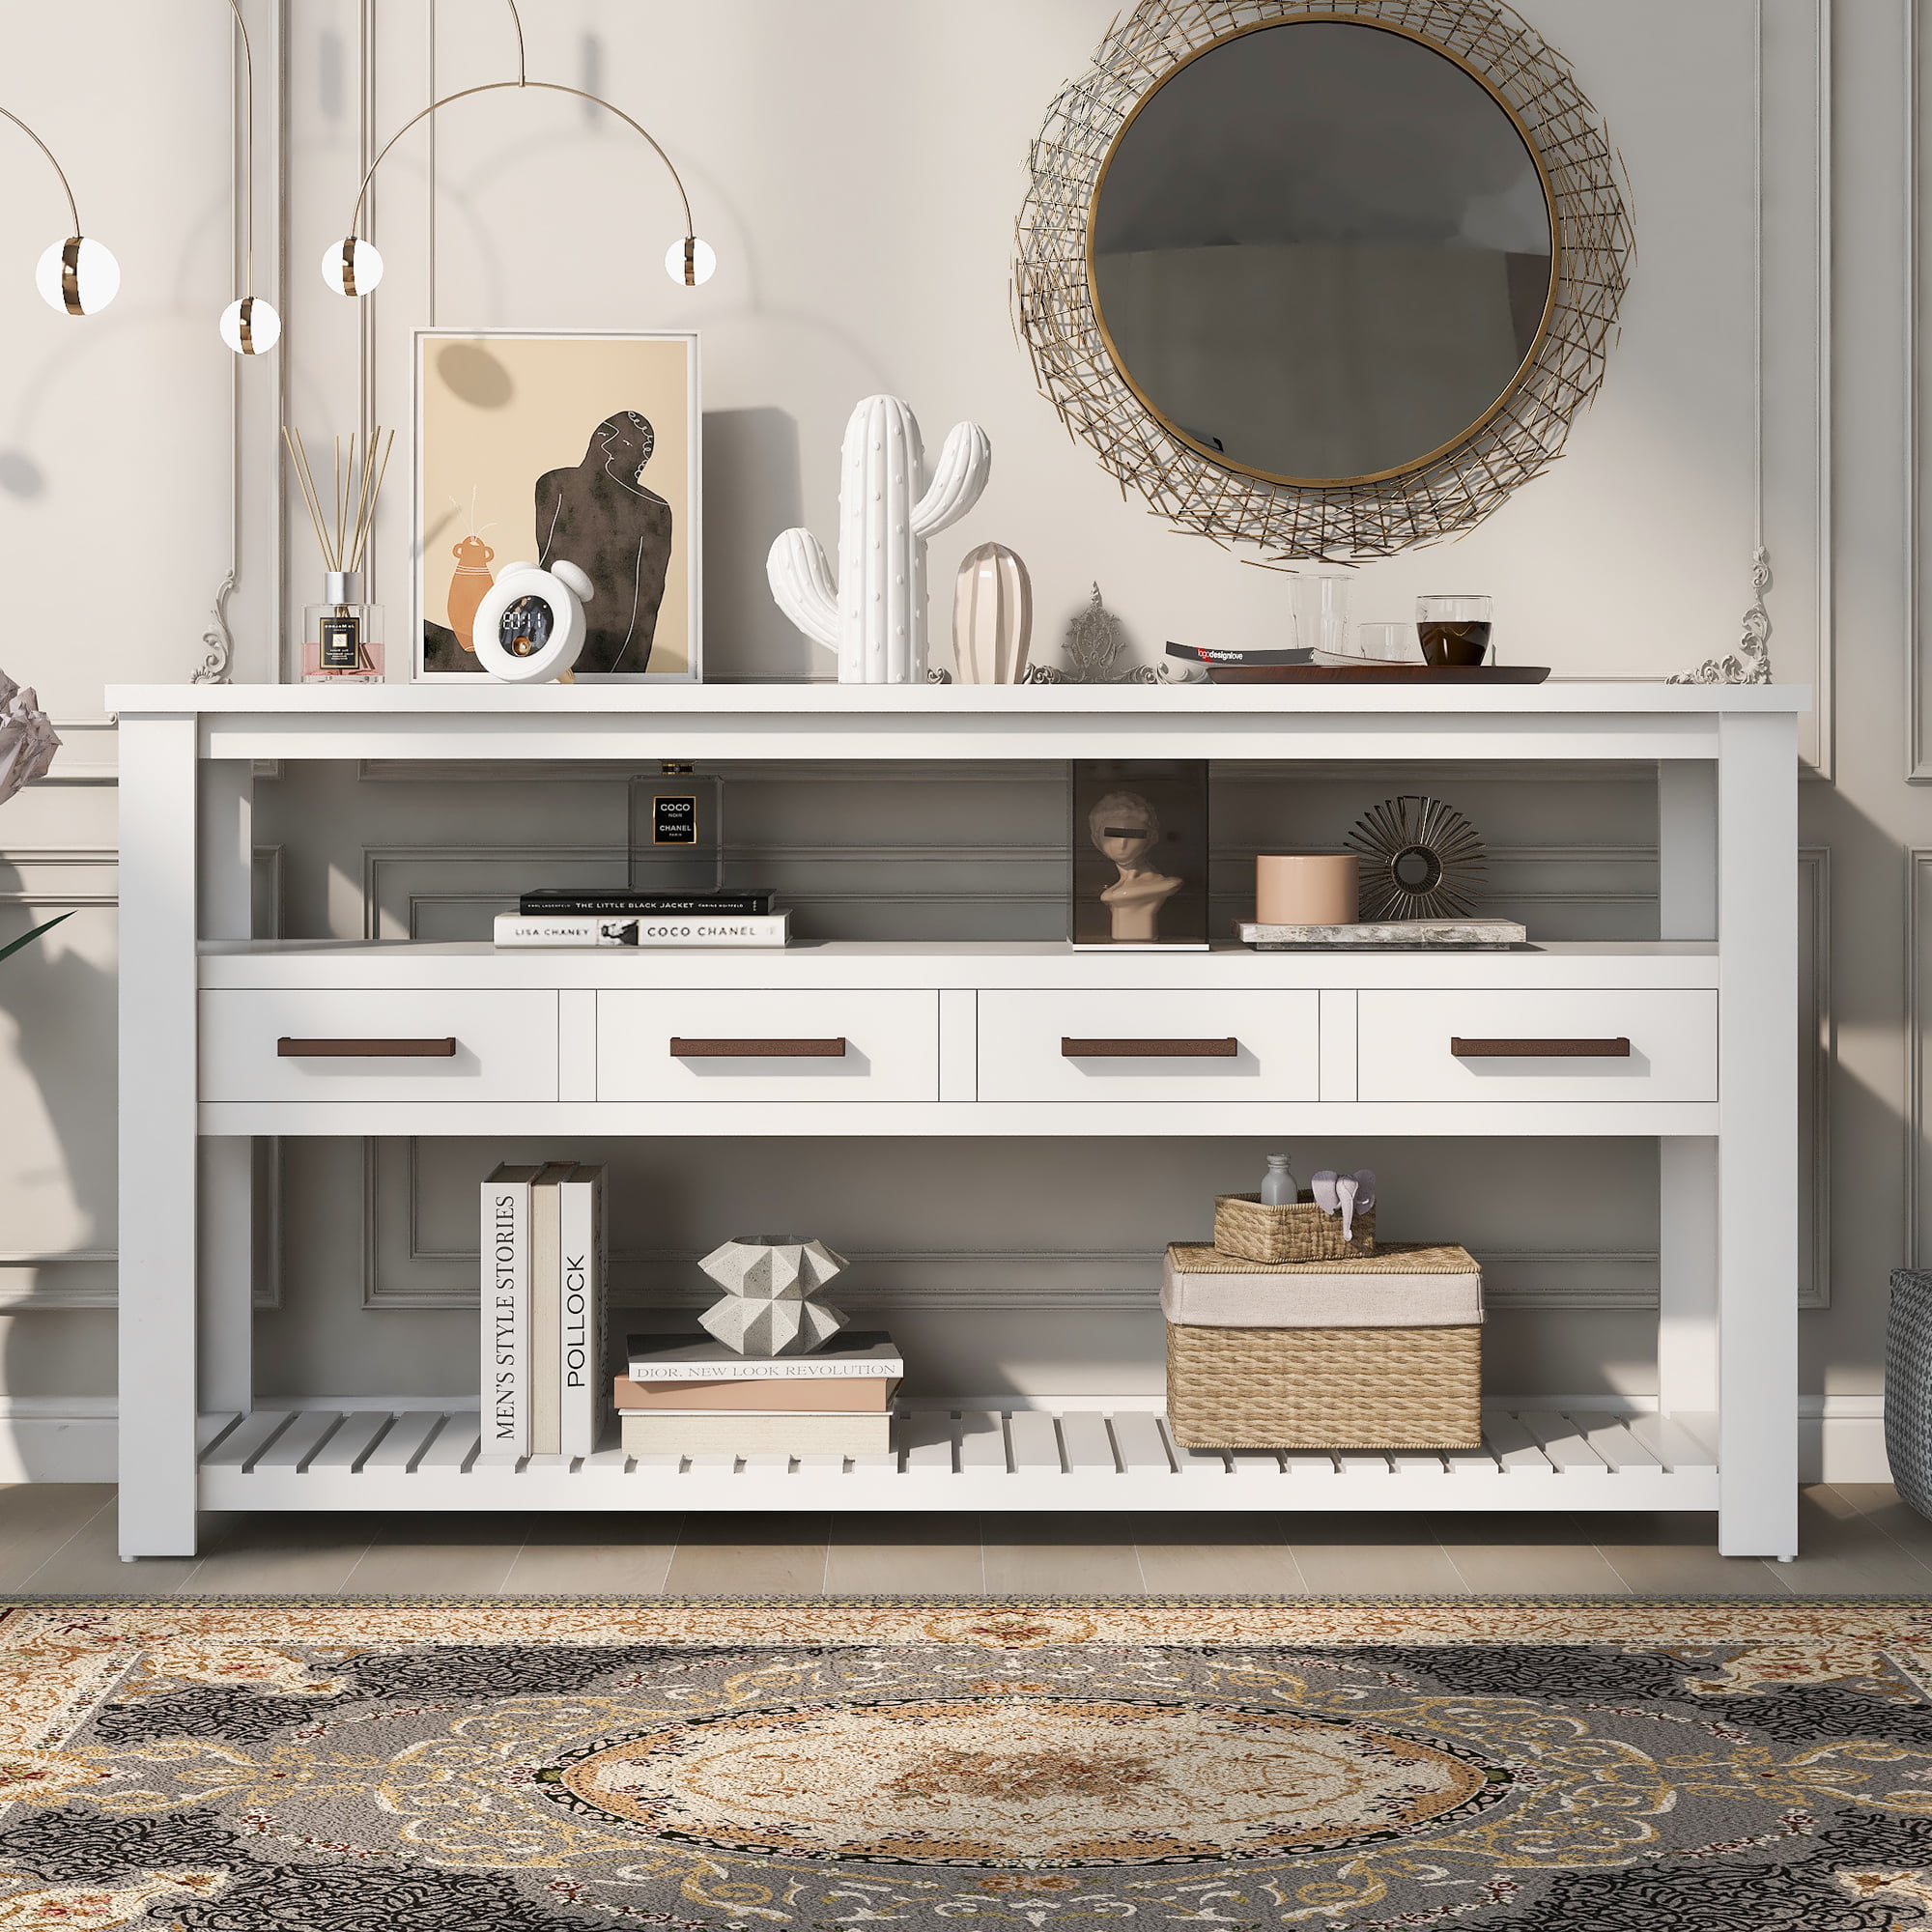 62.2" Modern Console Table With 4 Drawers And 2 Shelves - WF298909AAK